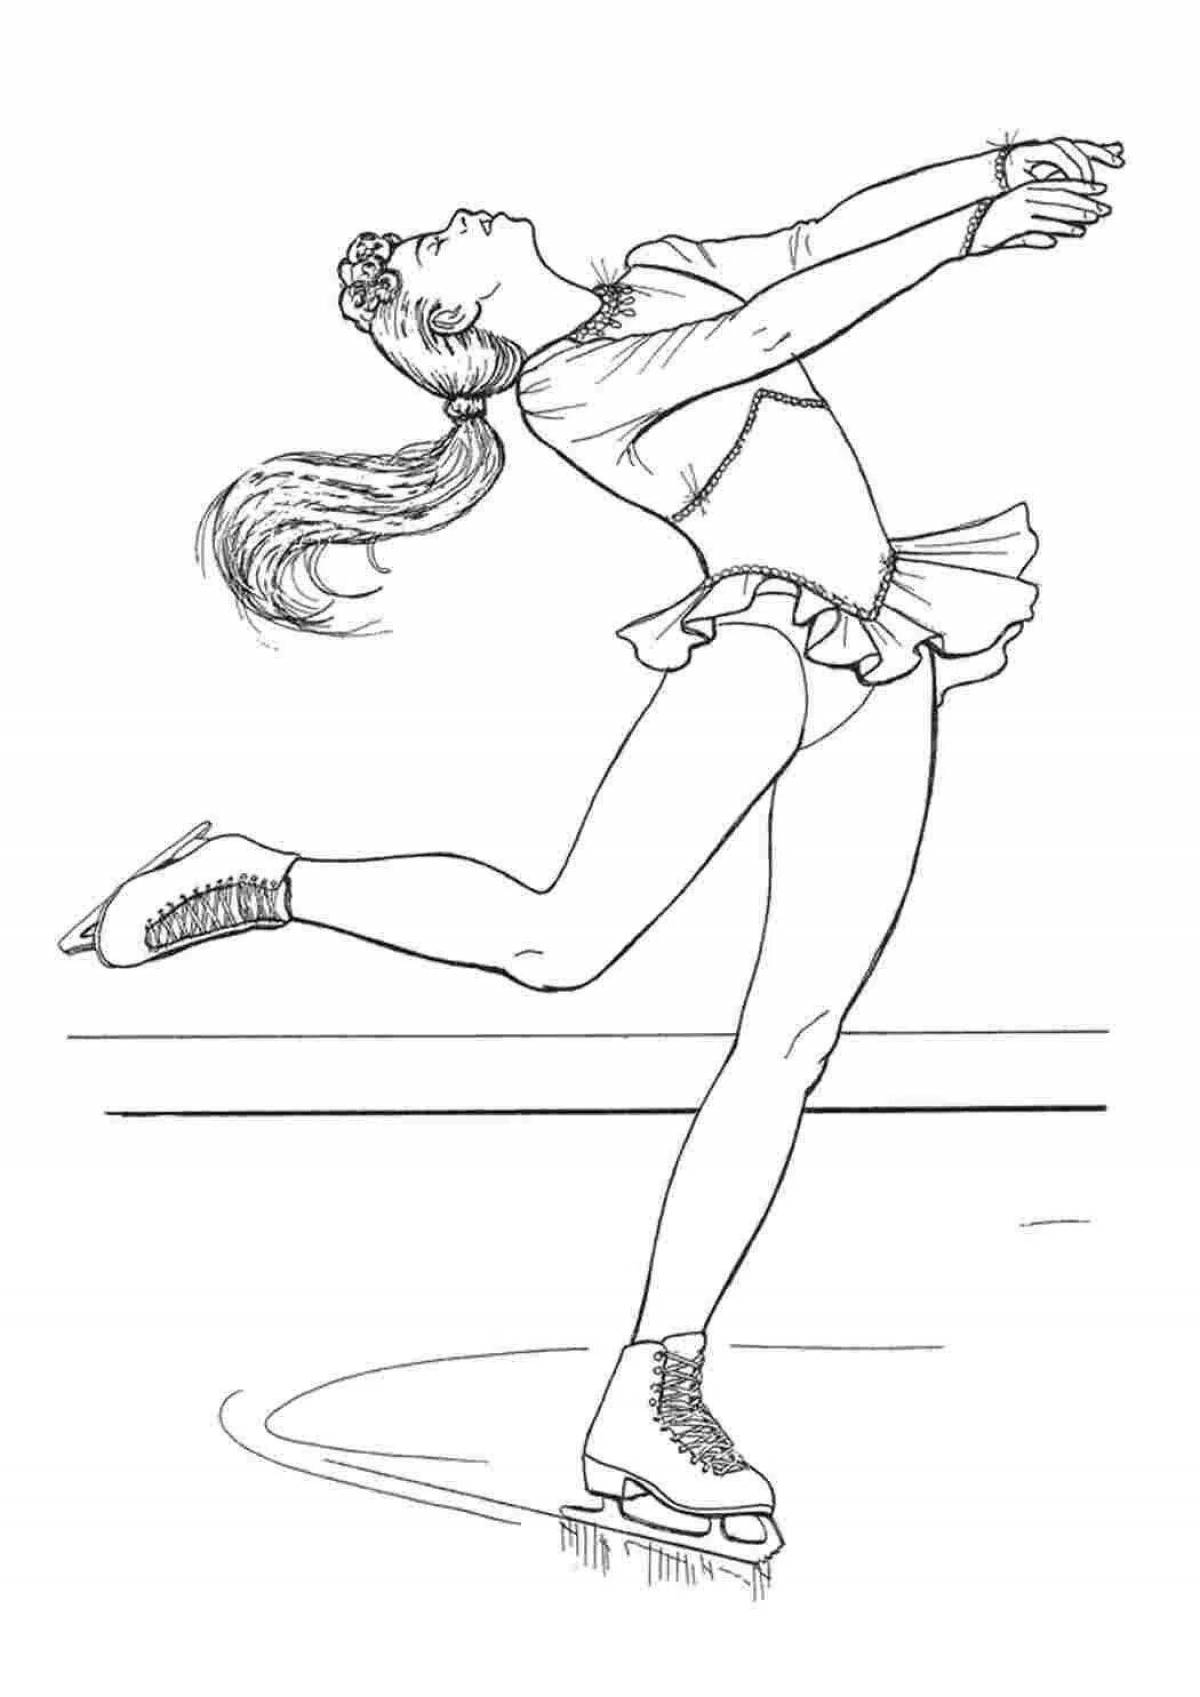 Playful figure skater coloring page for kids